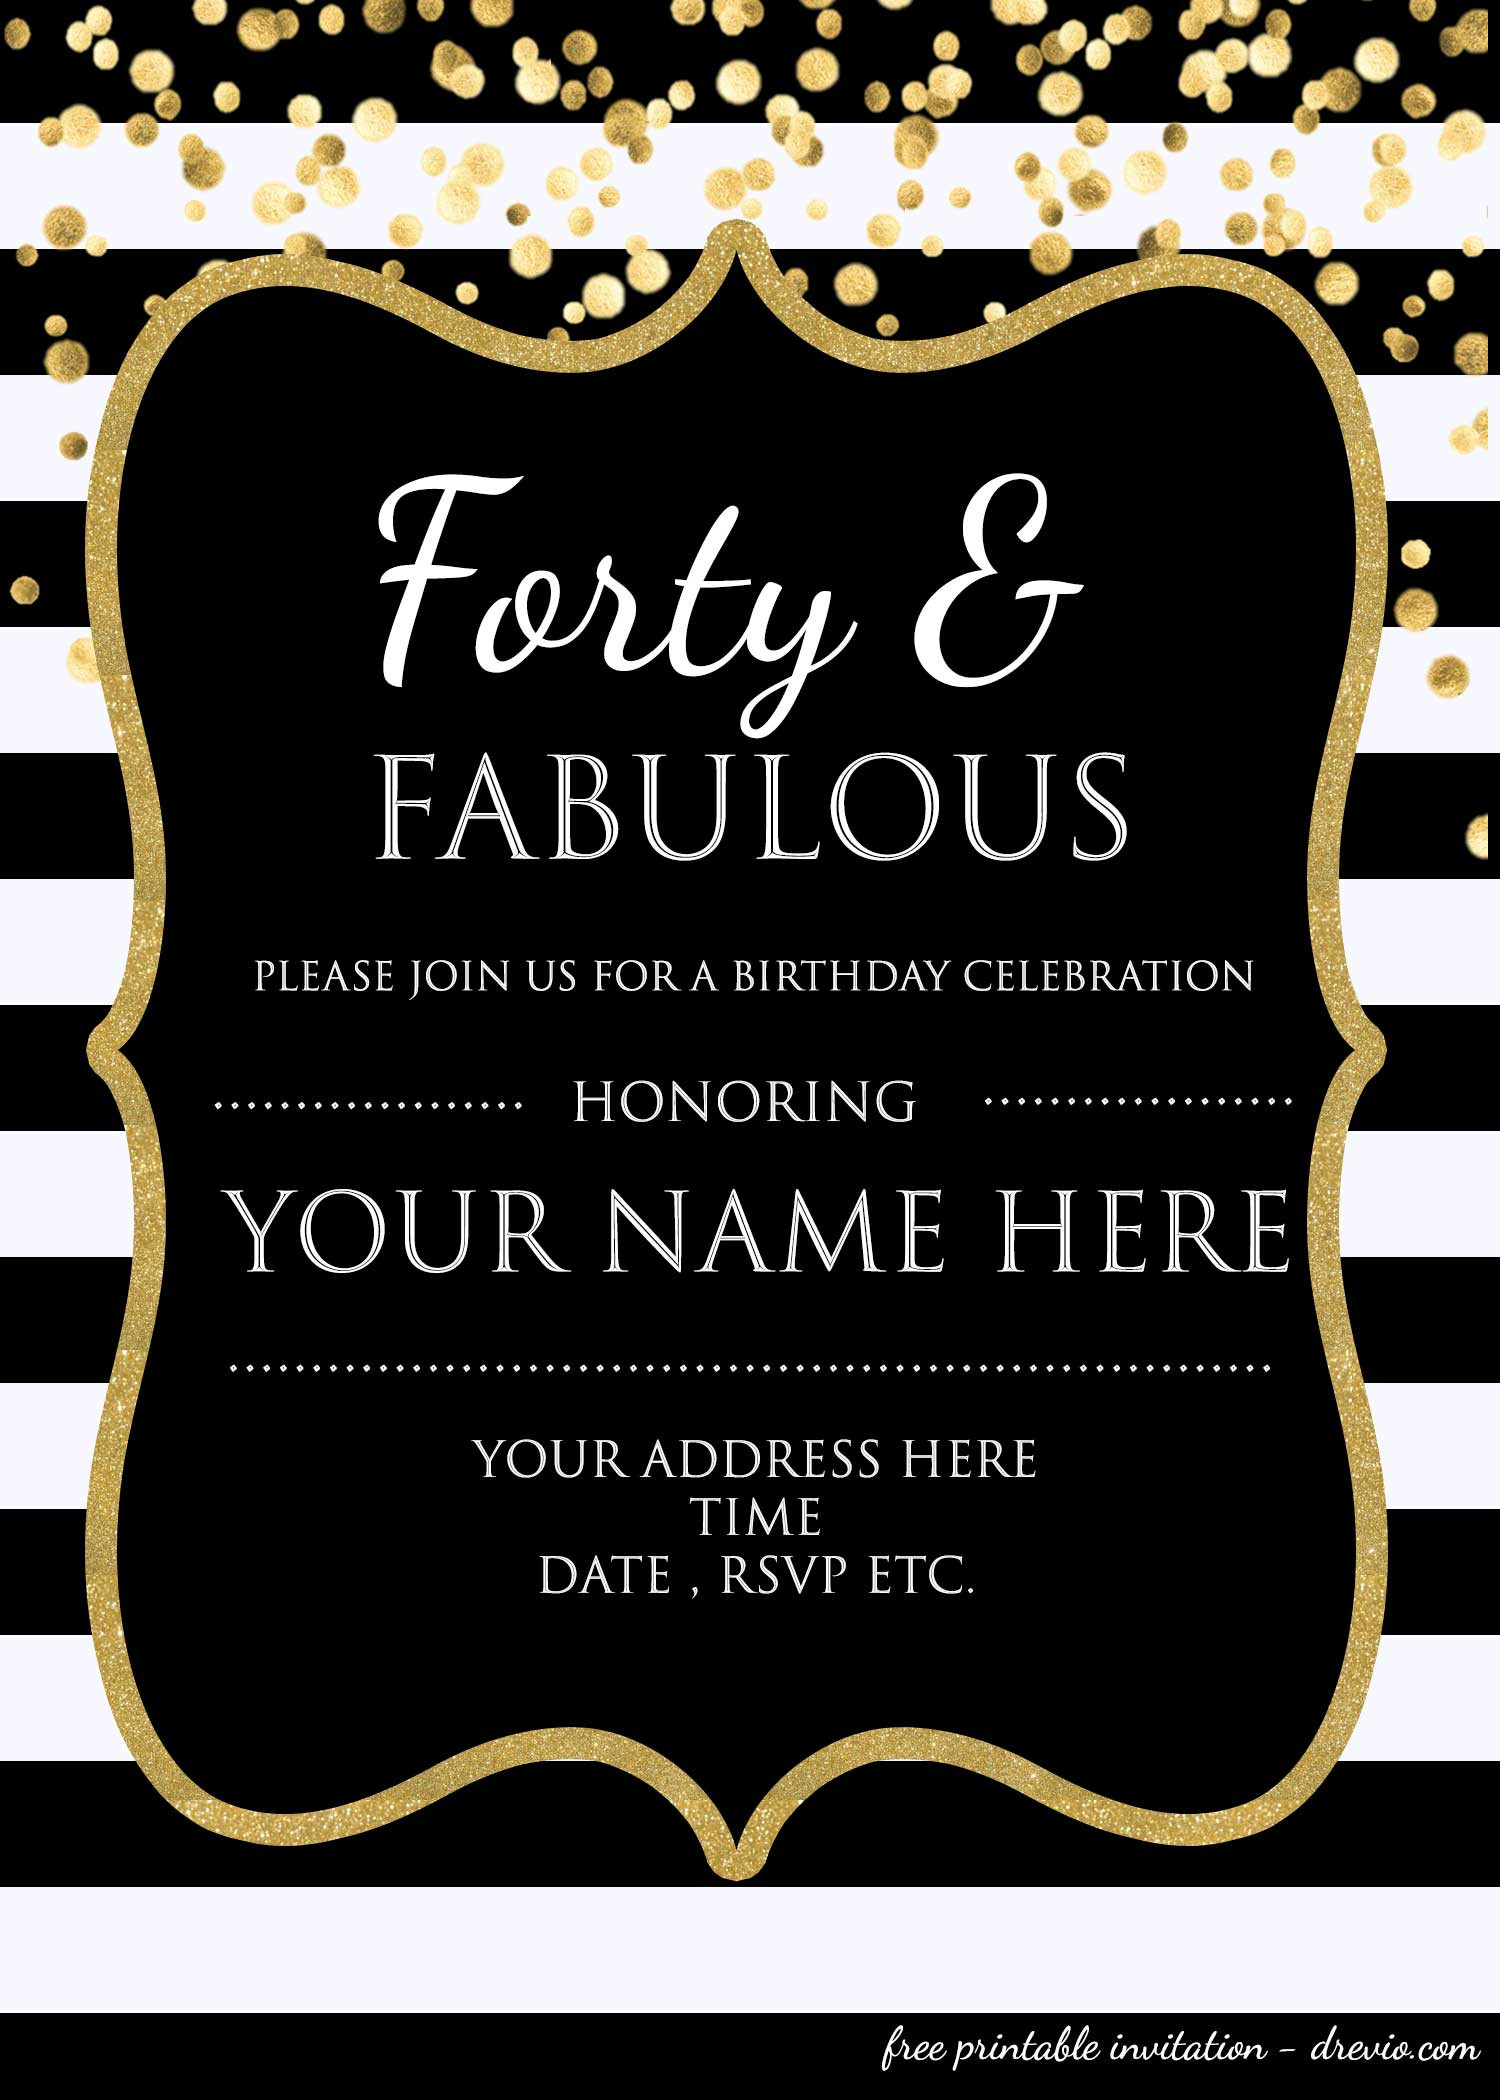 Birthday Party Invitations Template
 Forty & Fabulous 40th Birthday Invitation Template PSD